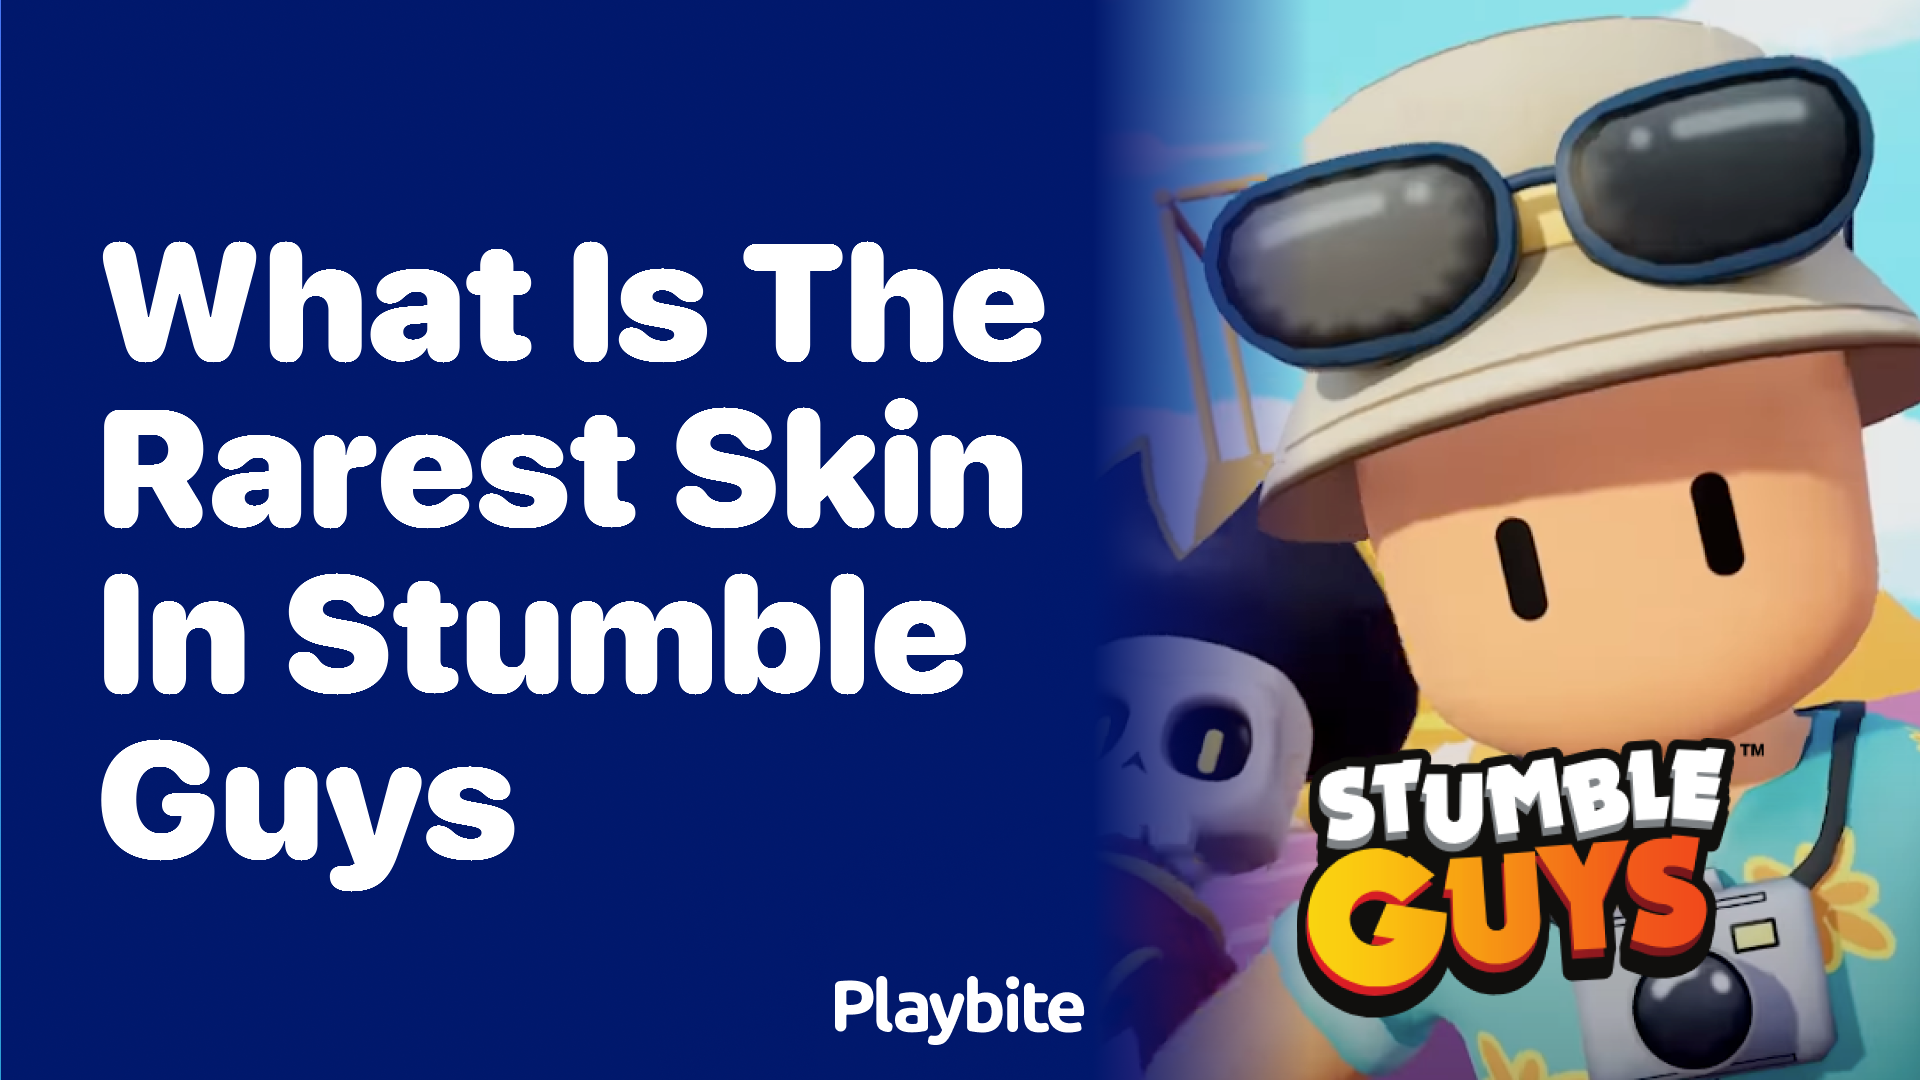 What is the Rarest Skin in Stumble Guys?